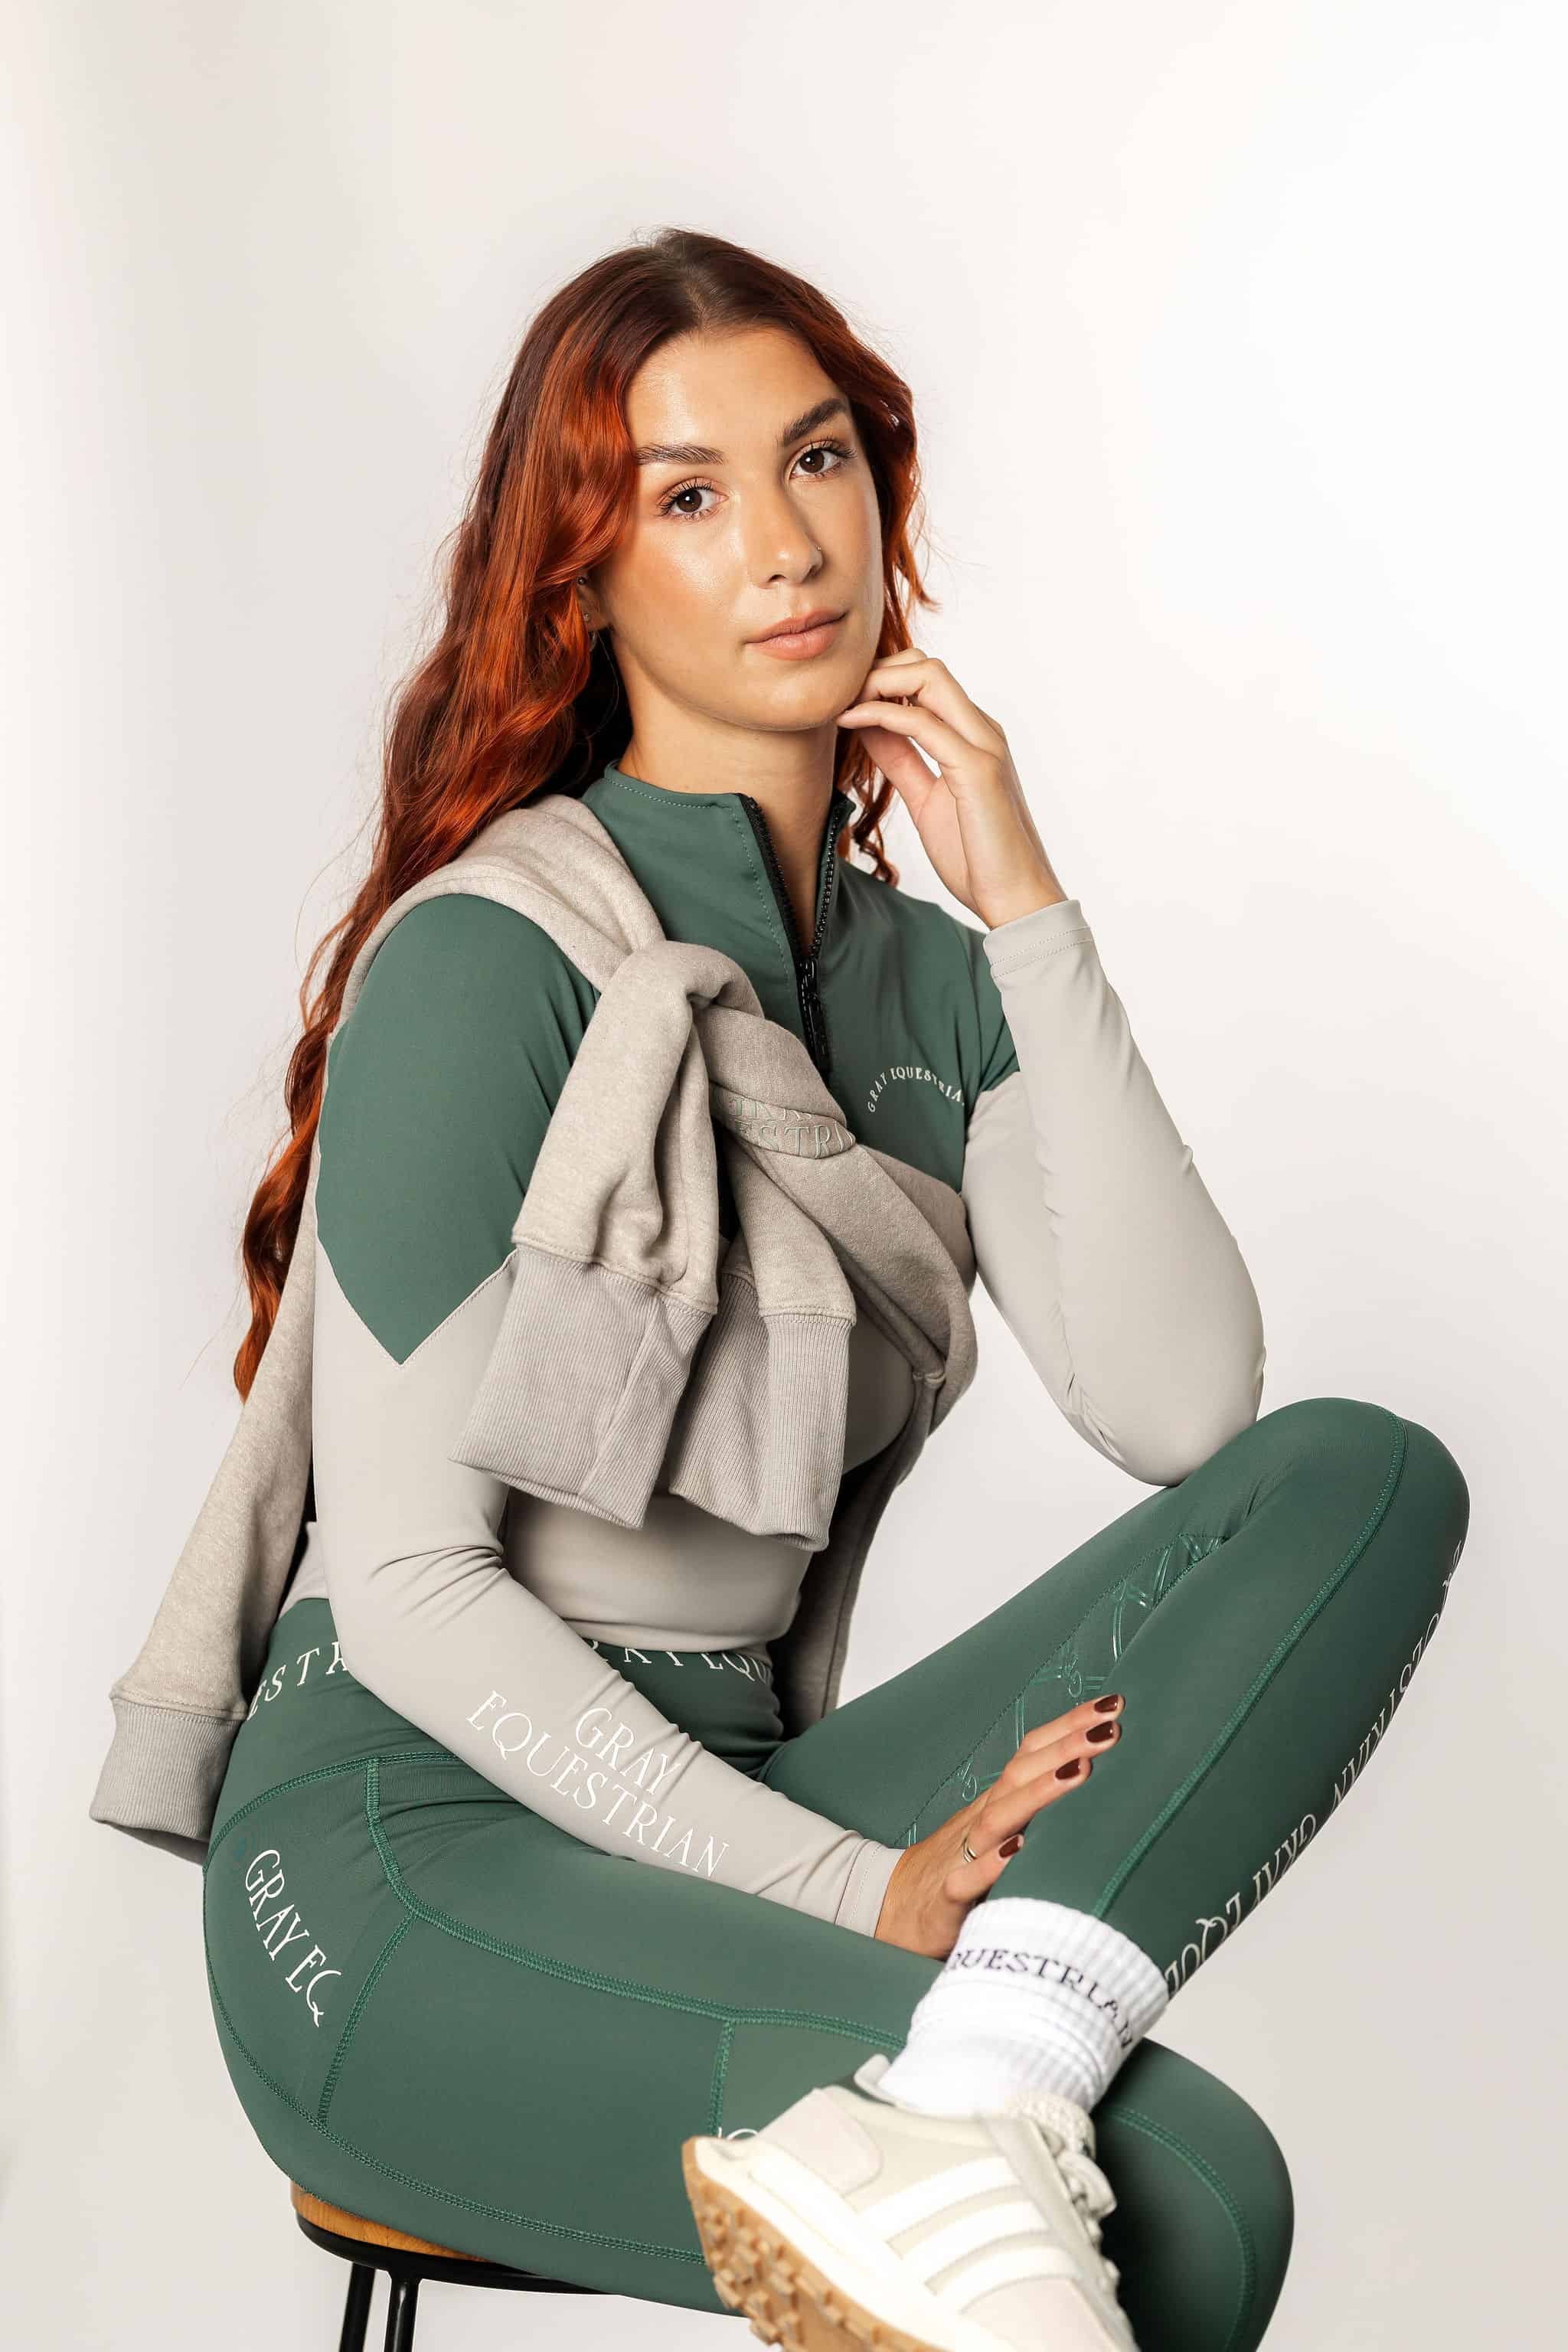 A model wearing our green and grey two toned base layer and matching green riding leggings.